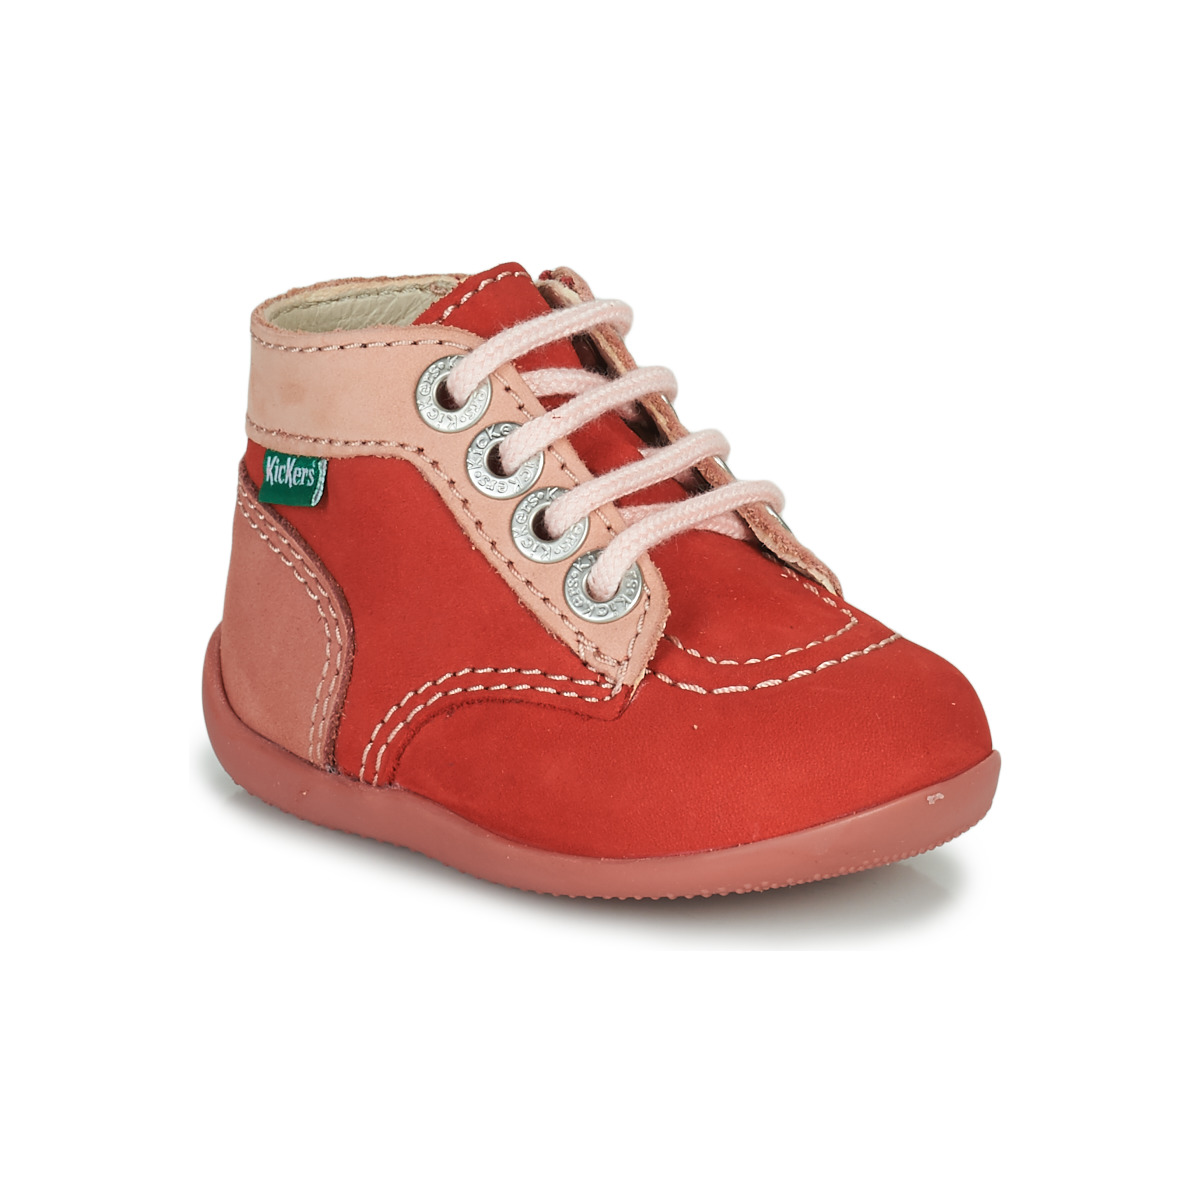 Chaussures Fille Teal Boots Kickers BONZIP-2 Rose